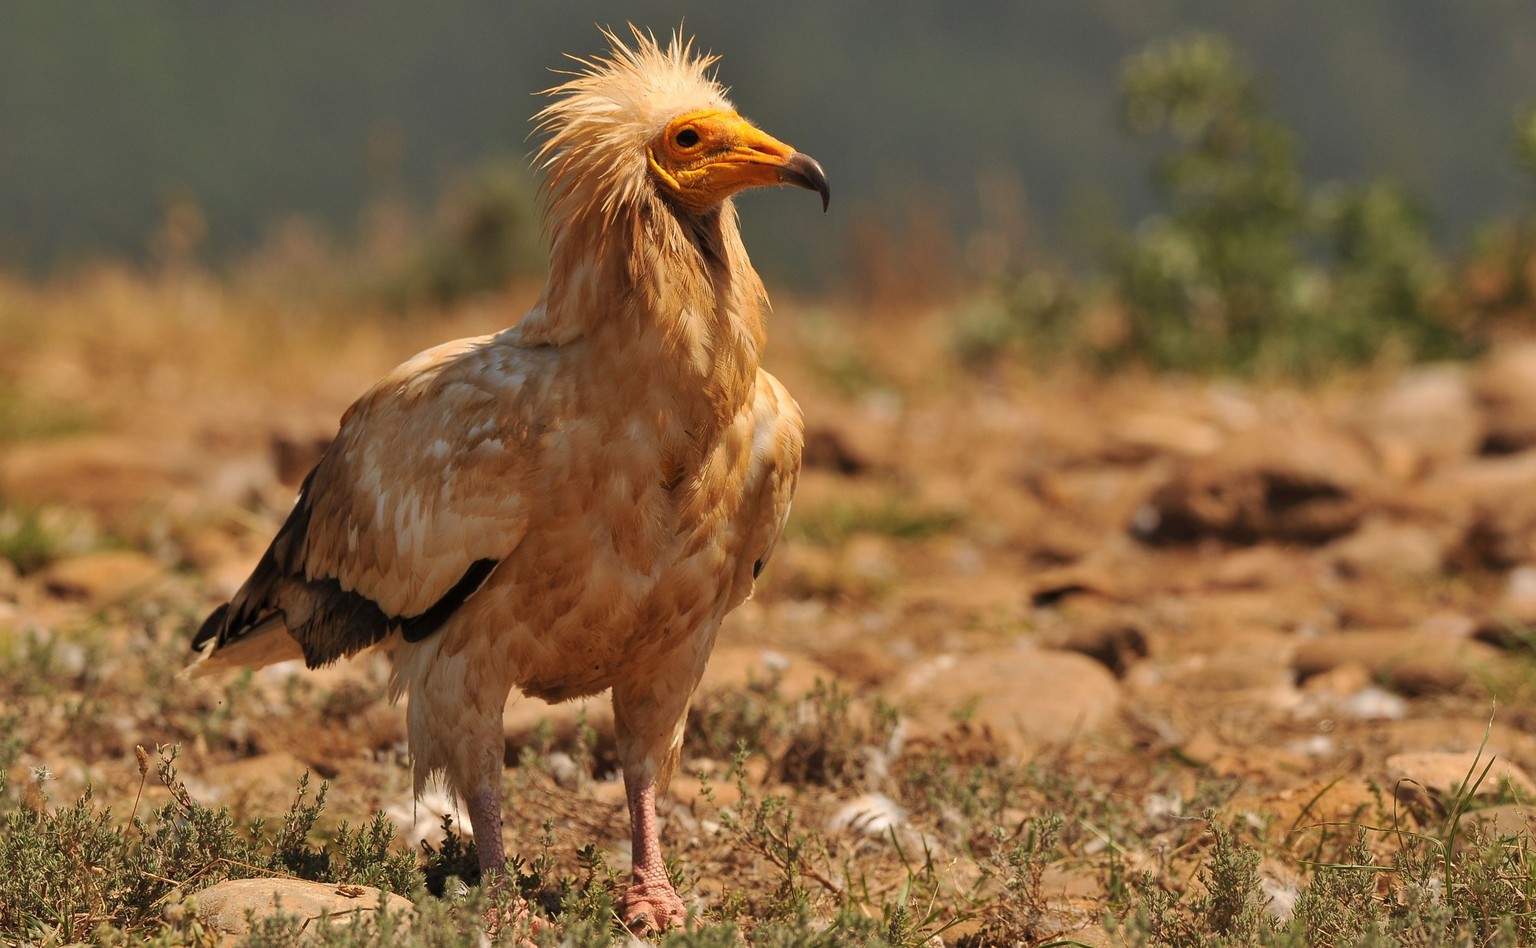 RECORD DATE NOT STATED A closeup shot of a brown Egyptian vulture looking forward standing on the rocky land in the field *** einer closeupe erschossen des einer braune